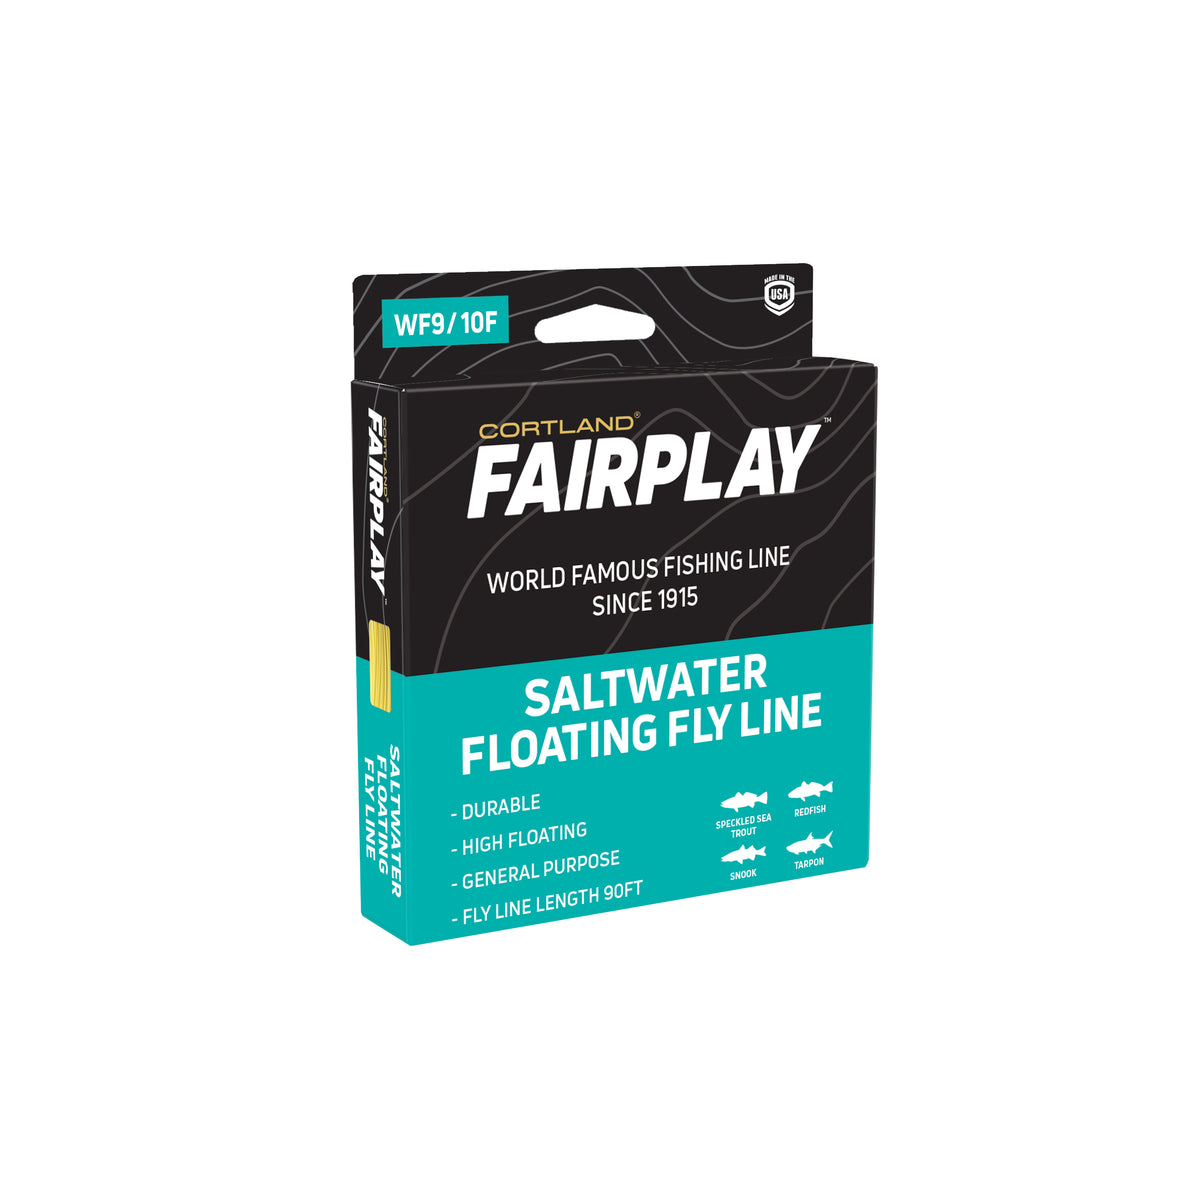 Cortland Fairplay Saltwater Fly Line, Wf9/10f, 90ft, 326118, Size: Assorted